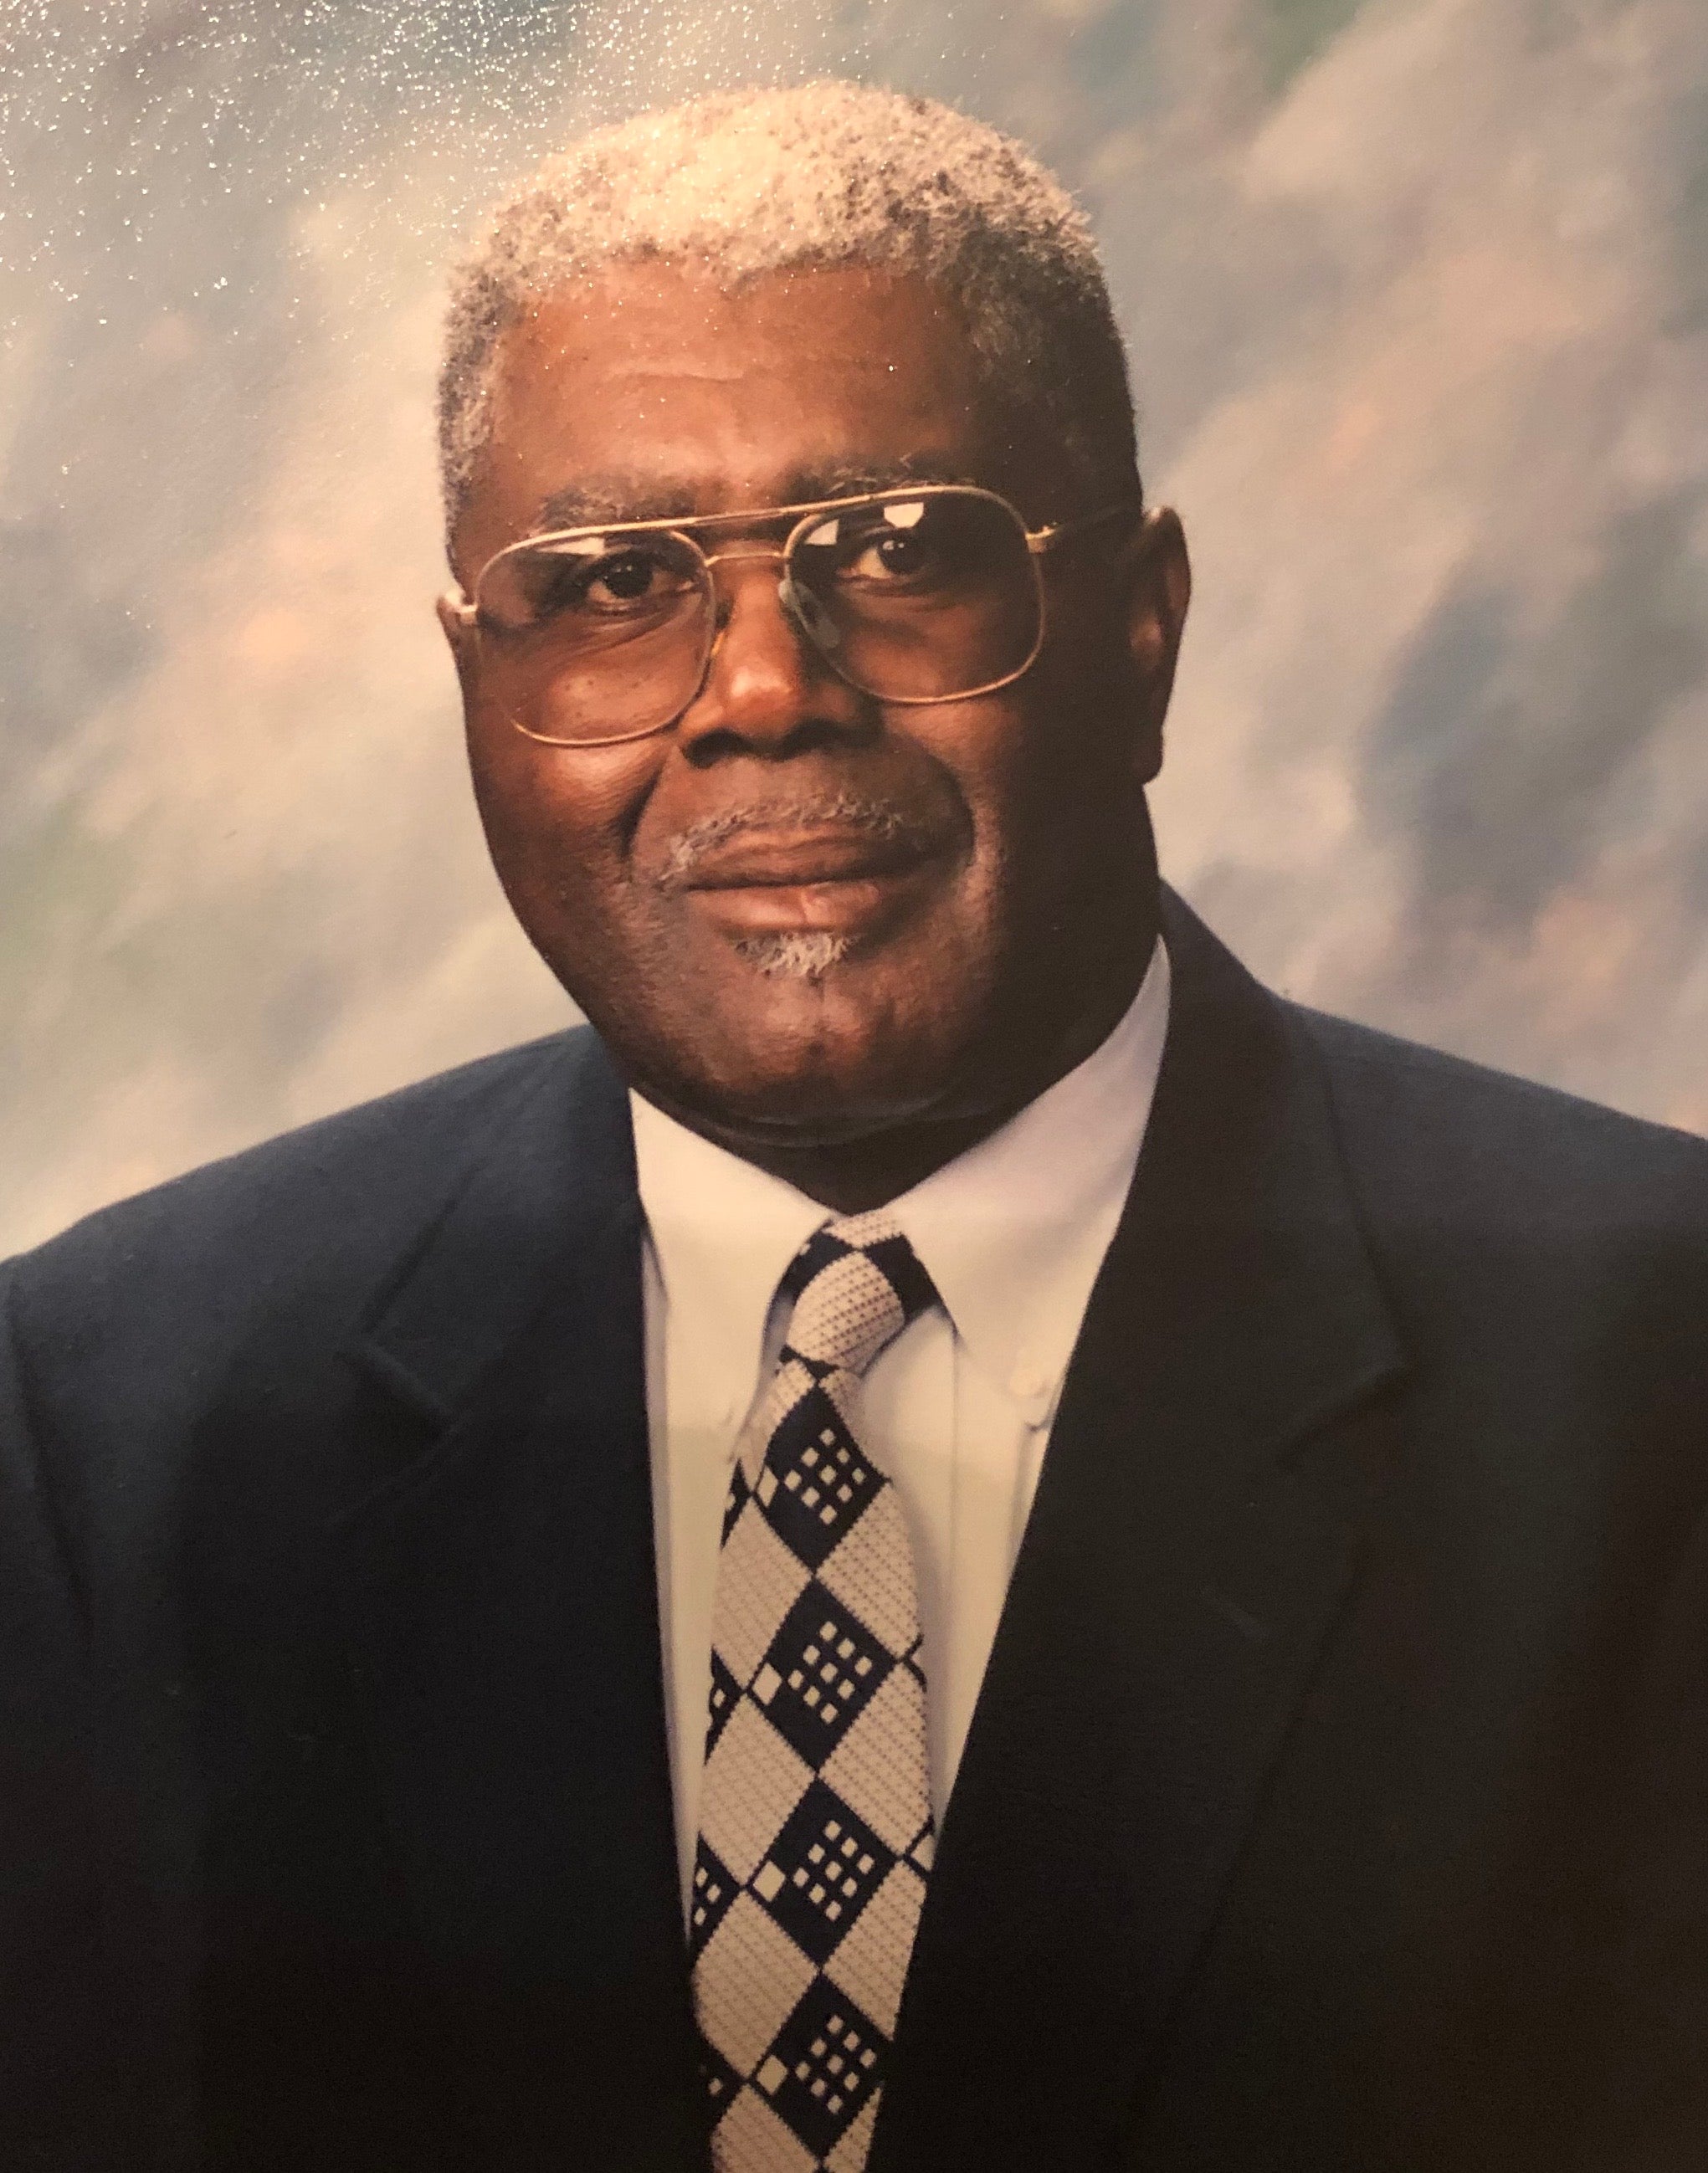 serenity funeral home oxford ms obituary